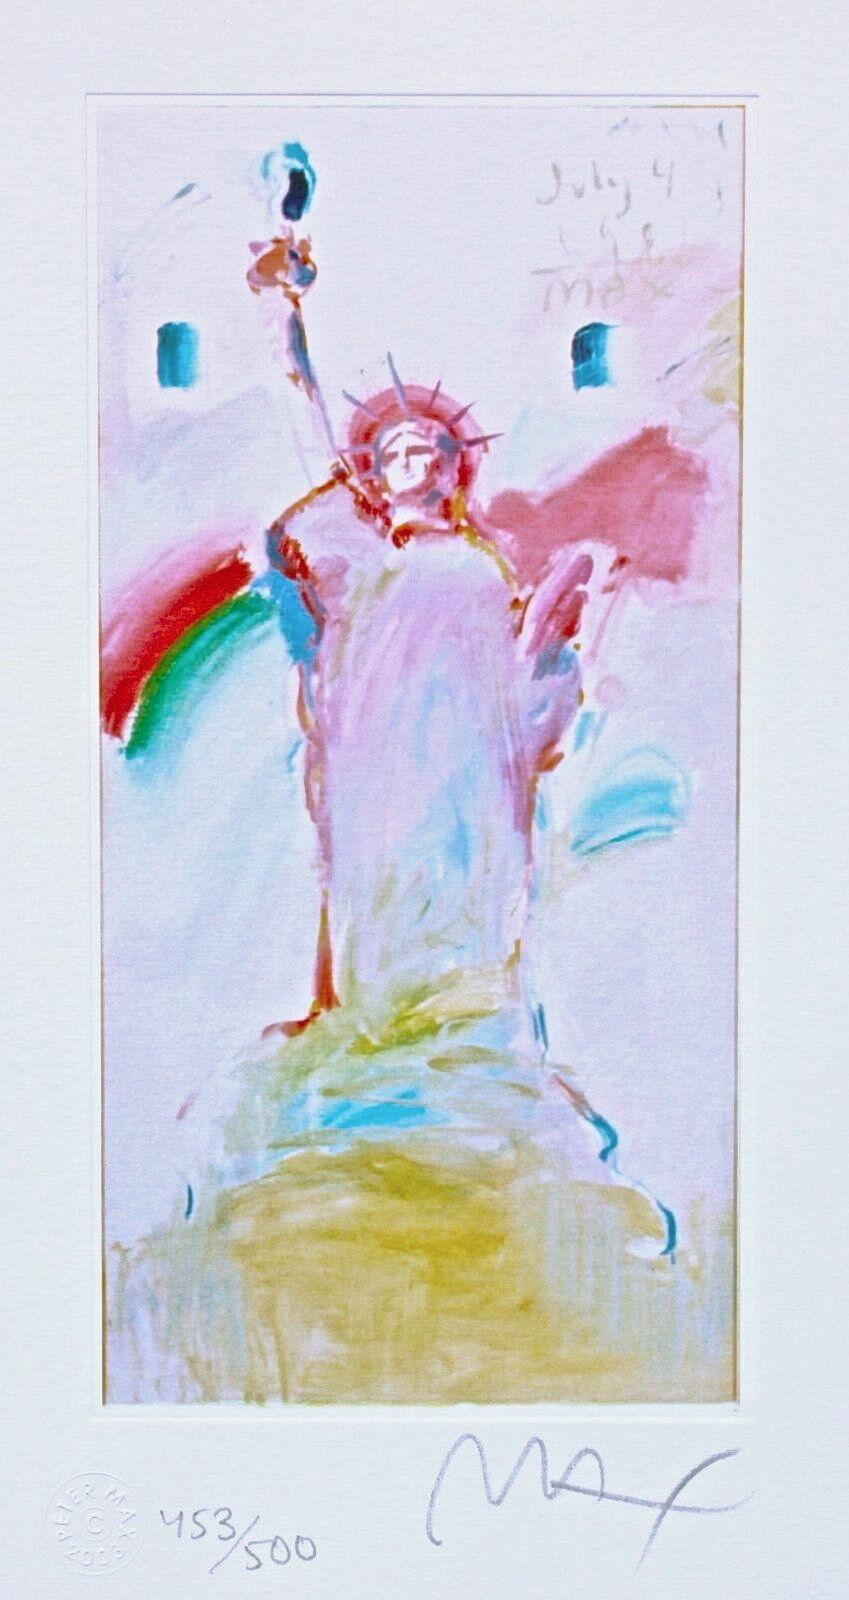 Artist: Peter Max (1937)
Title: Statue of Liberty VII
Year: 2003
Edition: 453/500, plus proofs
Medium: Lithograph on Lustro Saxony paper
Size: 10 x 5.5 inches
Condition: Excellent
Inscription: Signed and numbered by the artist.
Notes: Published by